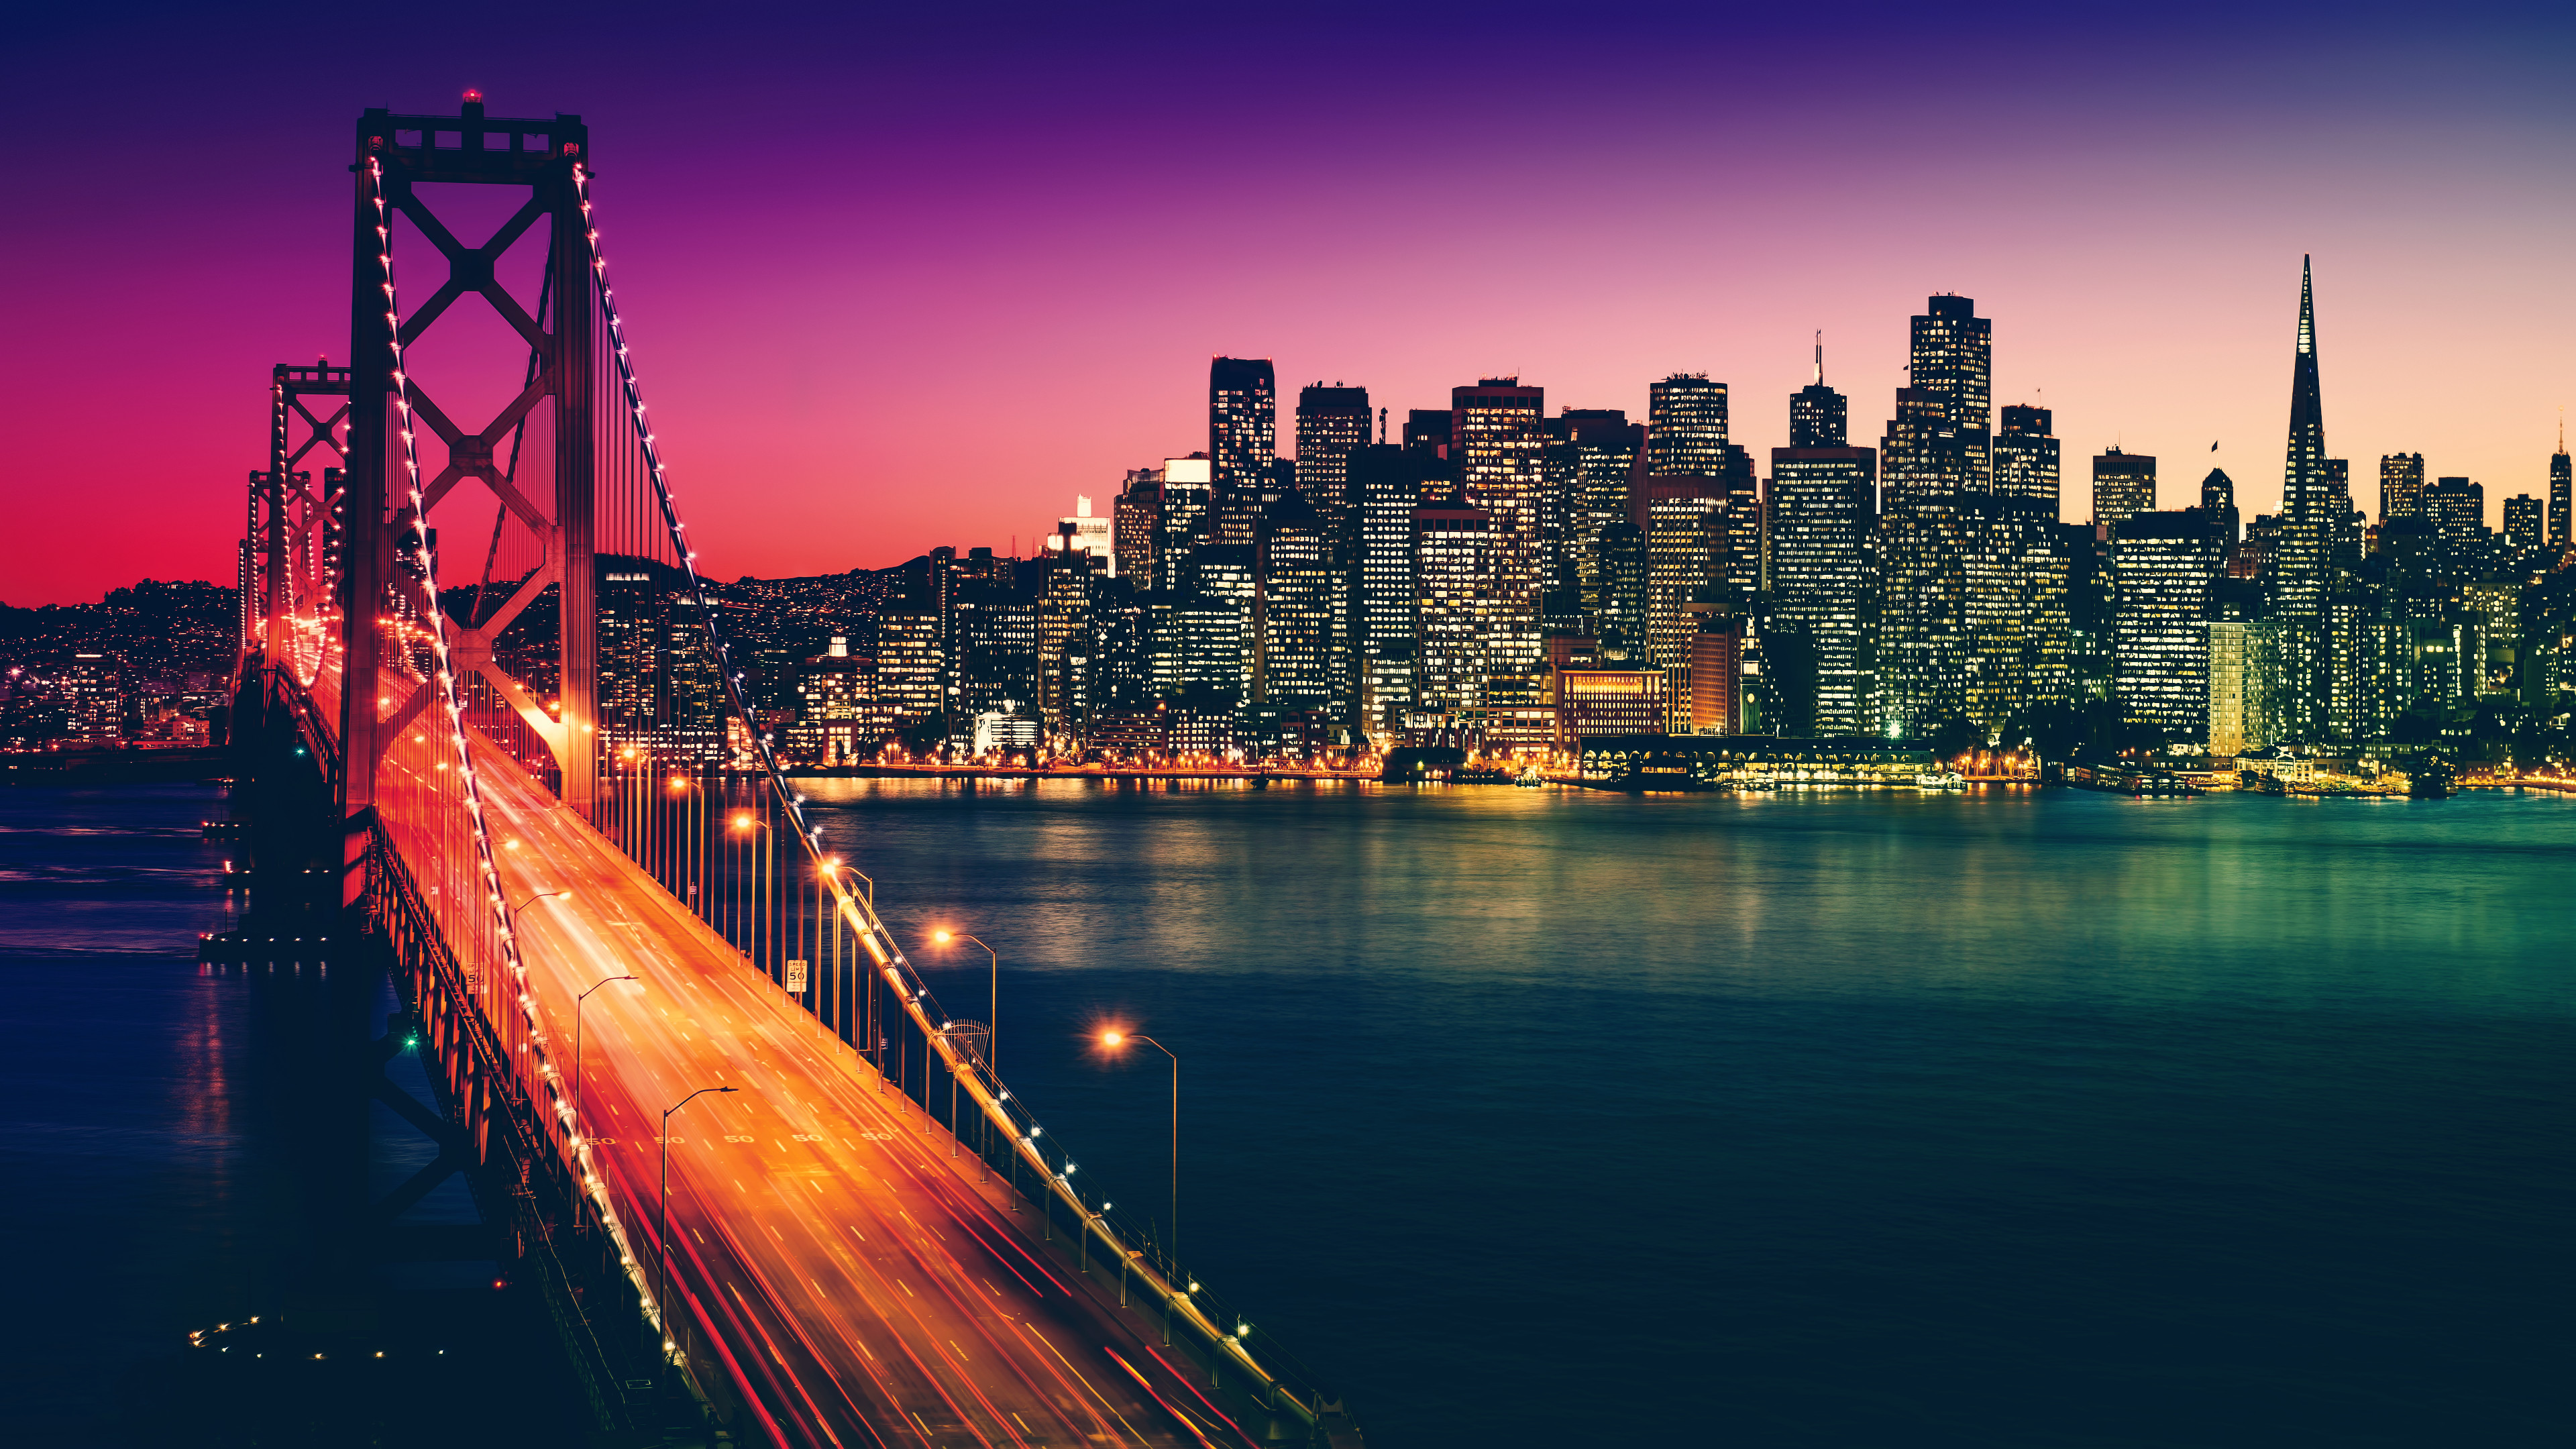 Artistic Sunset San Francisco Cityscape Wallpaper Hd Artist 4k Wallpapers Images Photos And Background Wallpapers Den